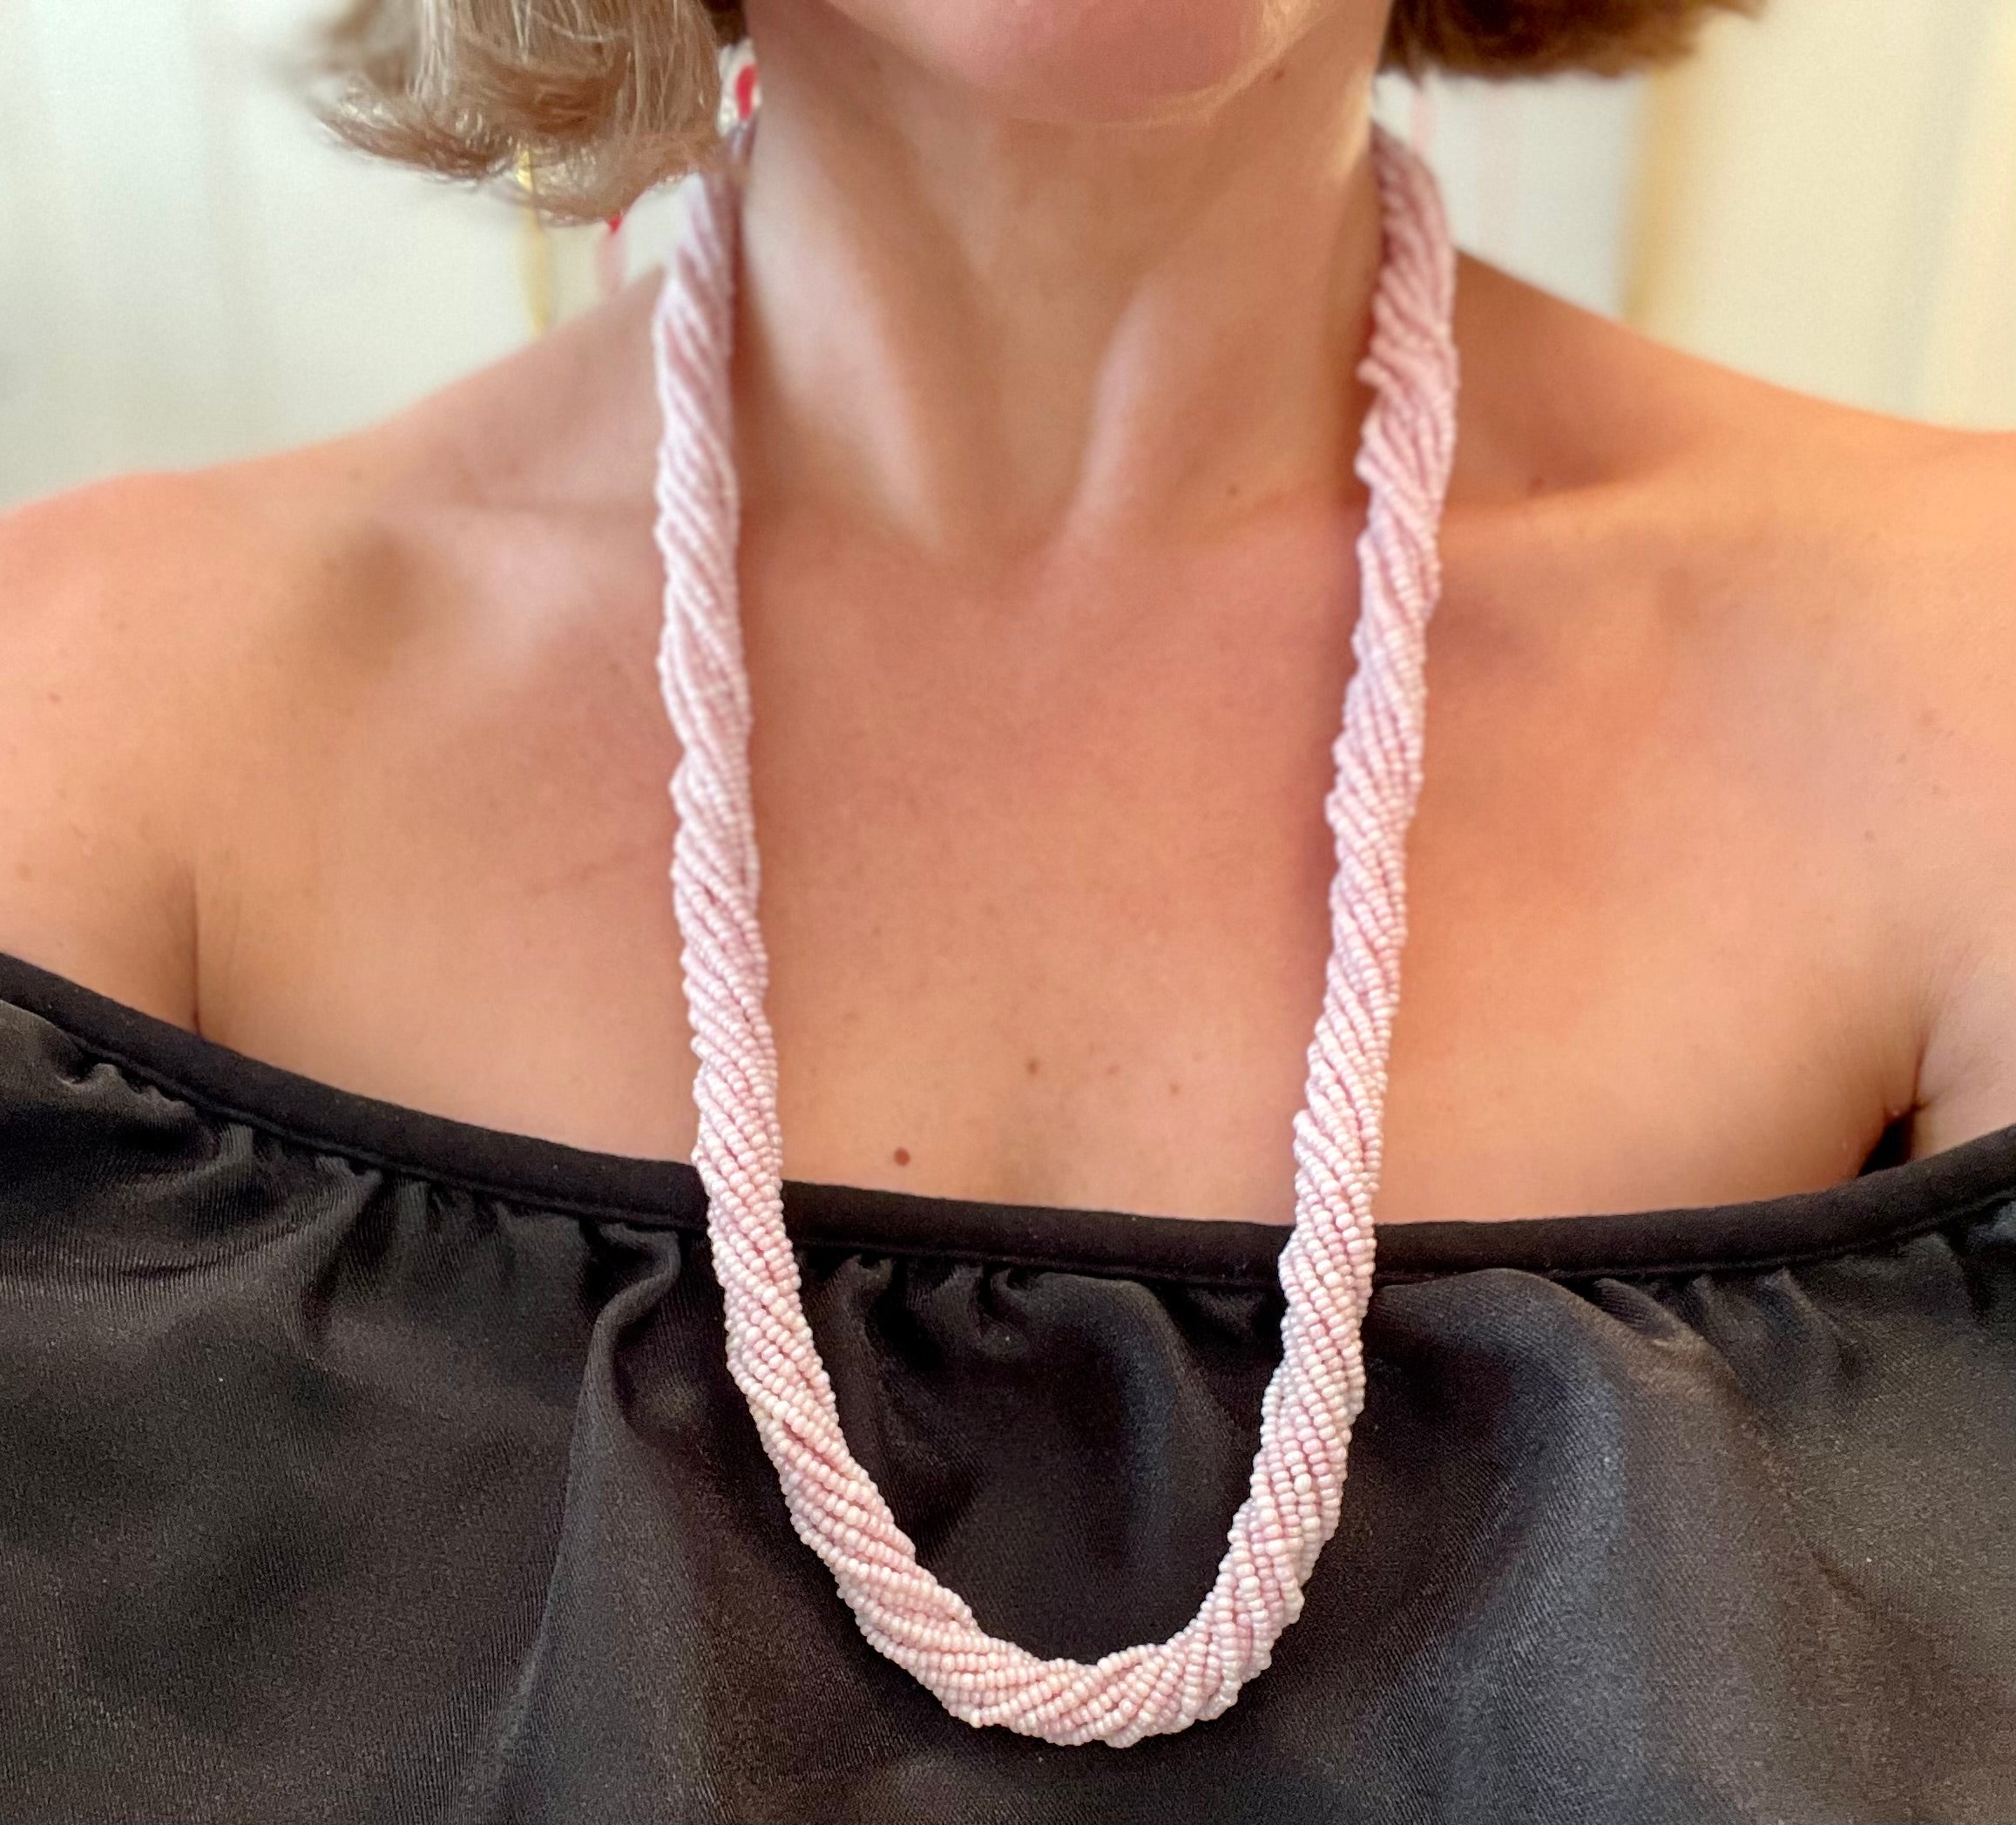 The Flirty gal and her love of pink! This 1970's soft pink beaded necklace is truly elegant.